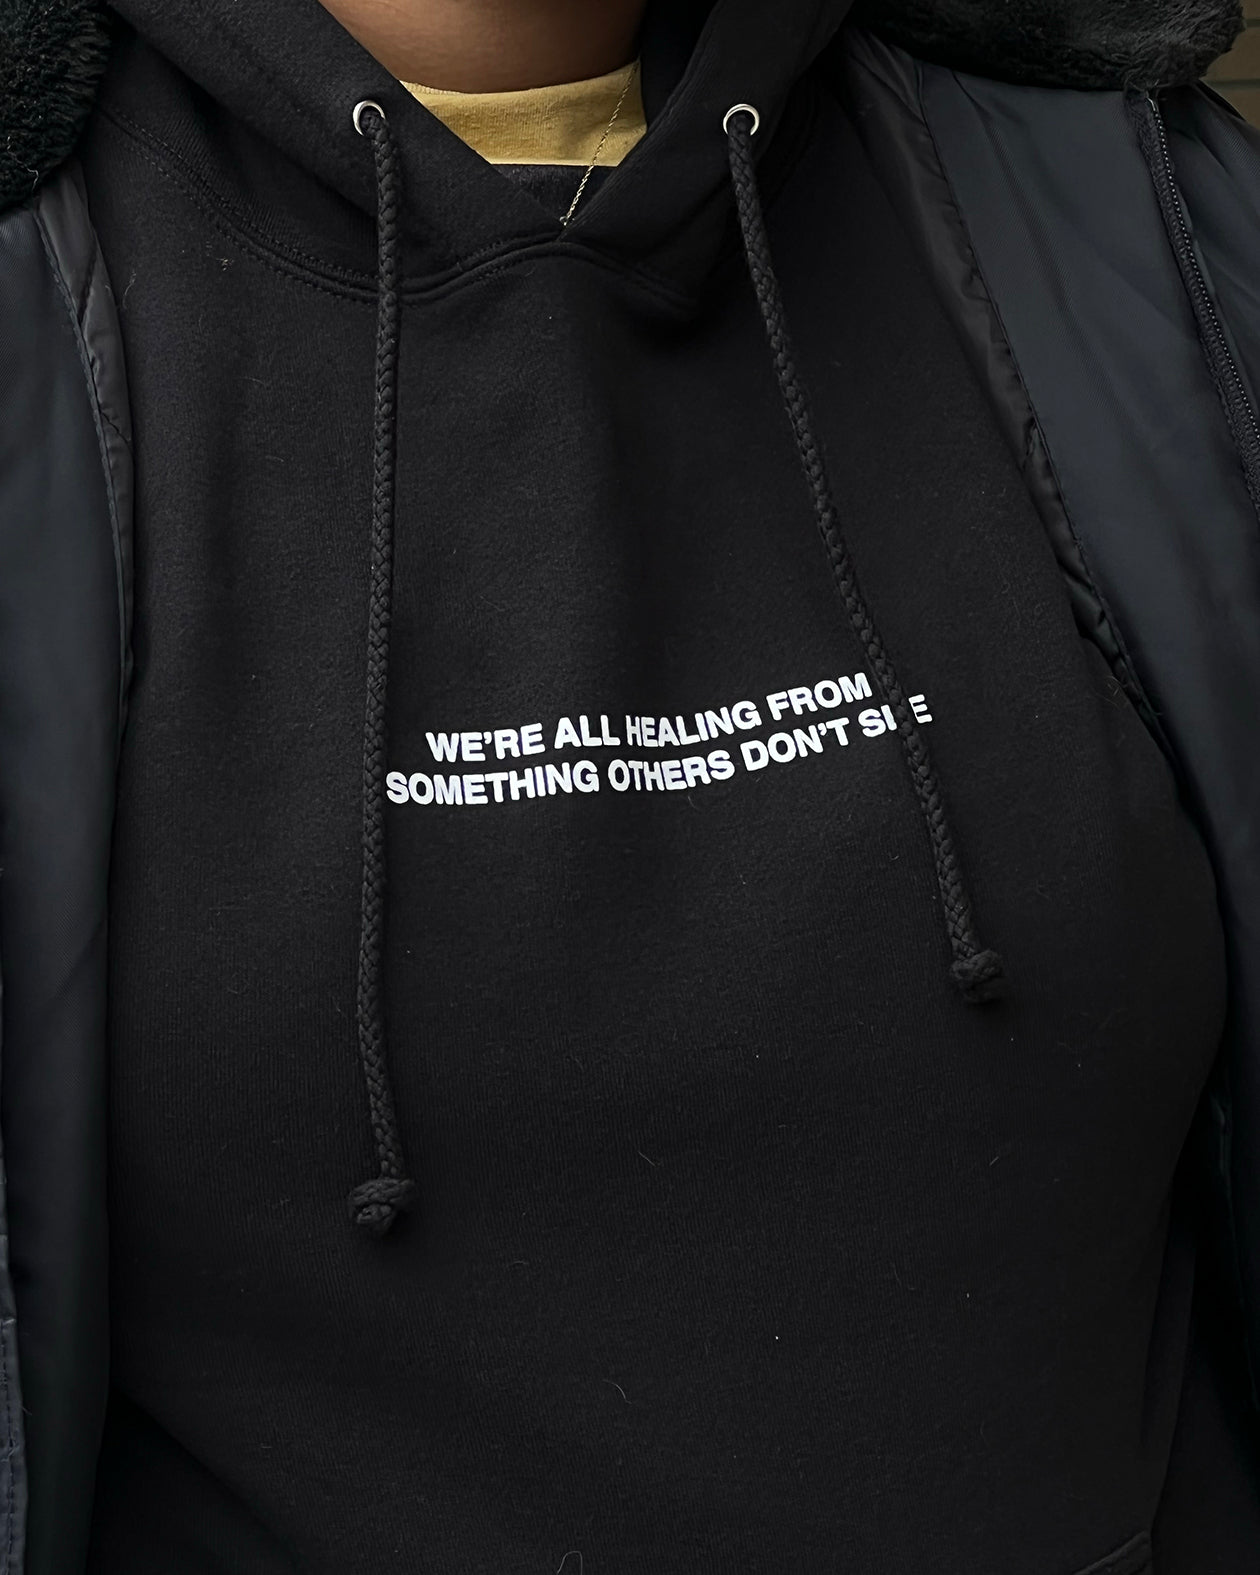 Let's Be Nicer To Each Other We're All Trying Our Best Print Hoodie